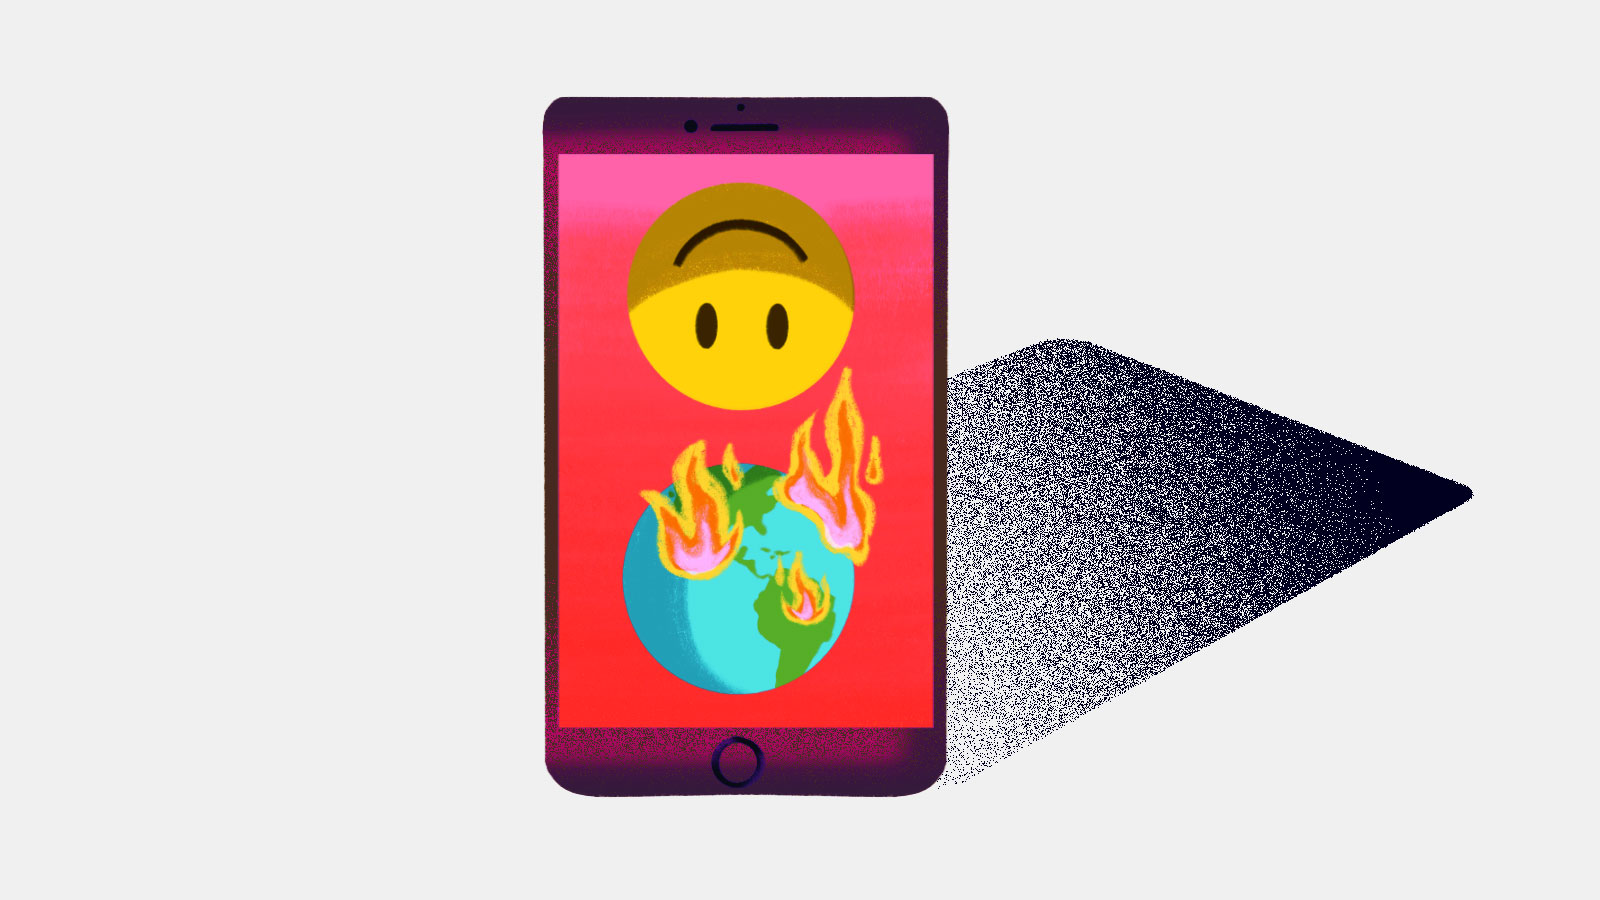 An illustration of an iPhone with the iFunny smiley face logo and an earth on fire on the screen of the phone.